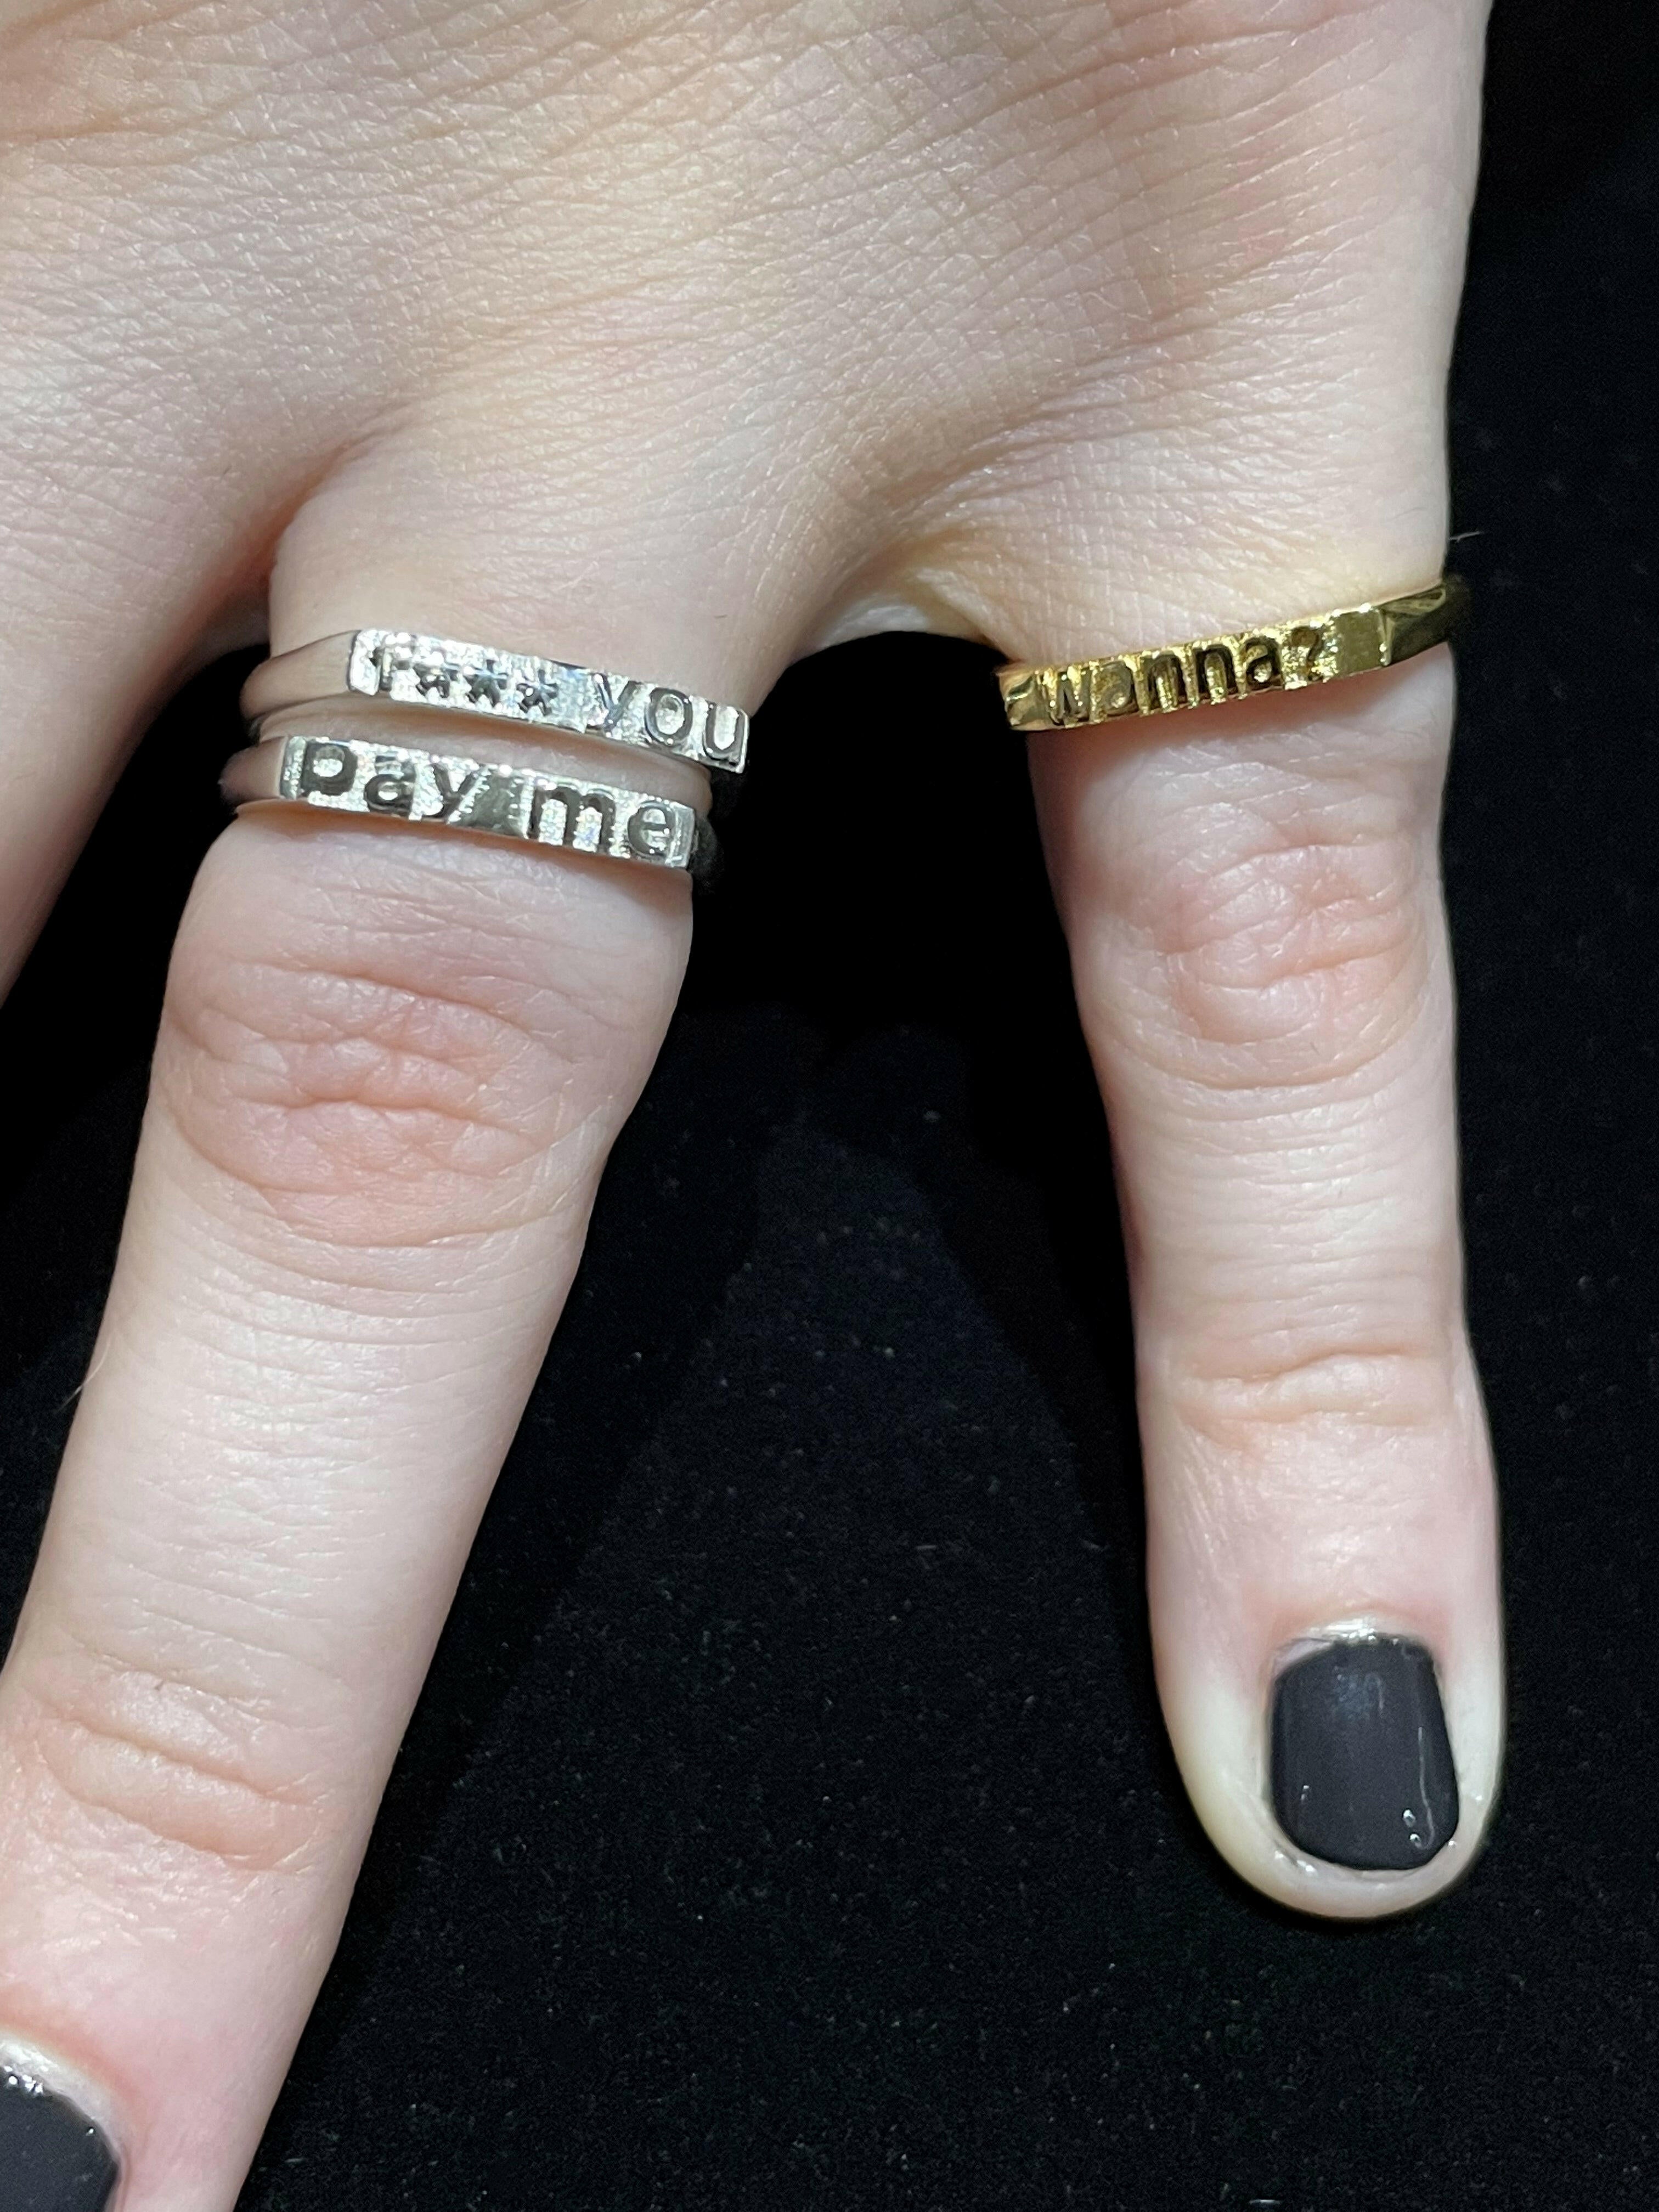 Two fingers, ring finger wearing 2 rings - first (top) 14 Karat white gold ring with text that reads "f*** you", second (bottom) 14 k white gold ring with text that reads "pay me". Pinky finger wearing a 14 karat yellow gold ring with text that reads "wanna?"